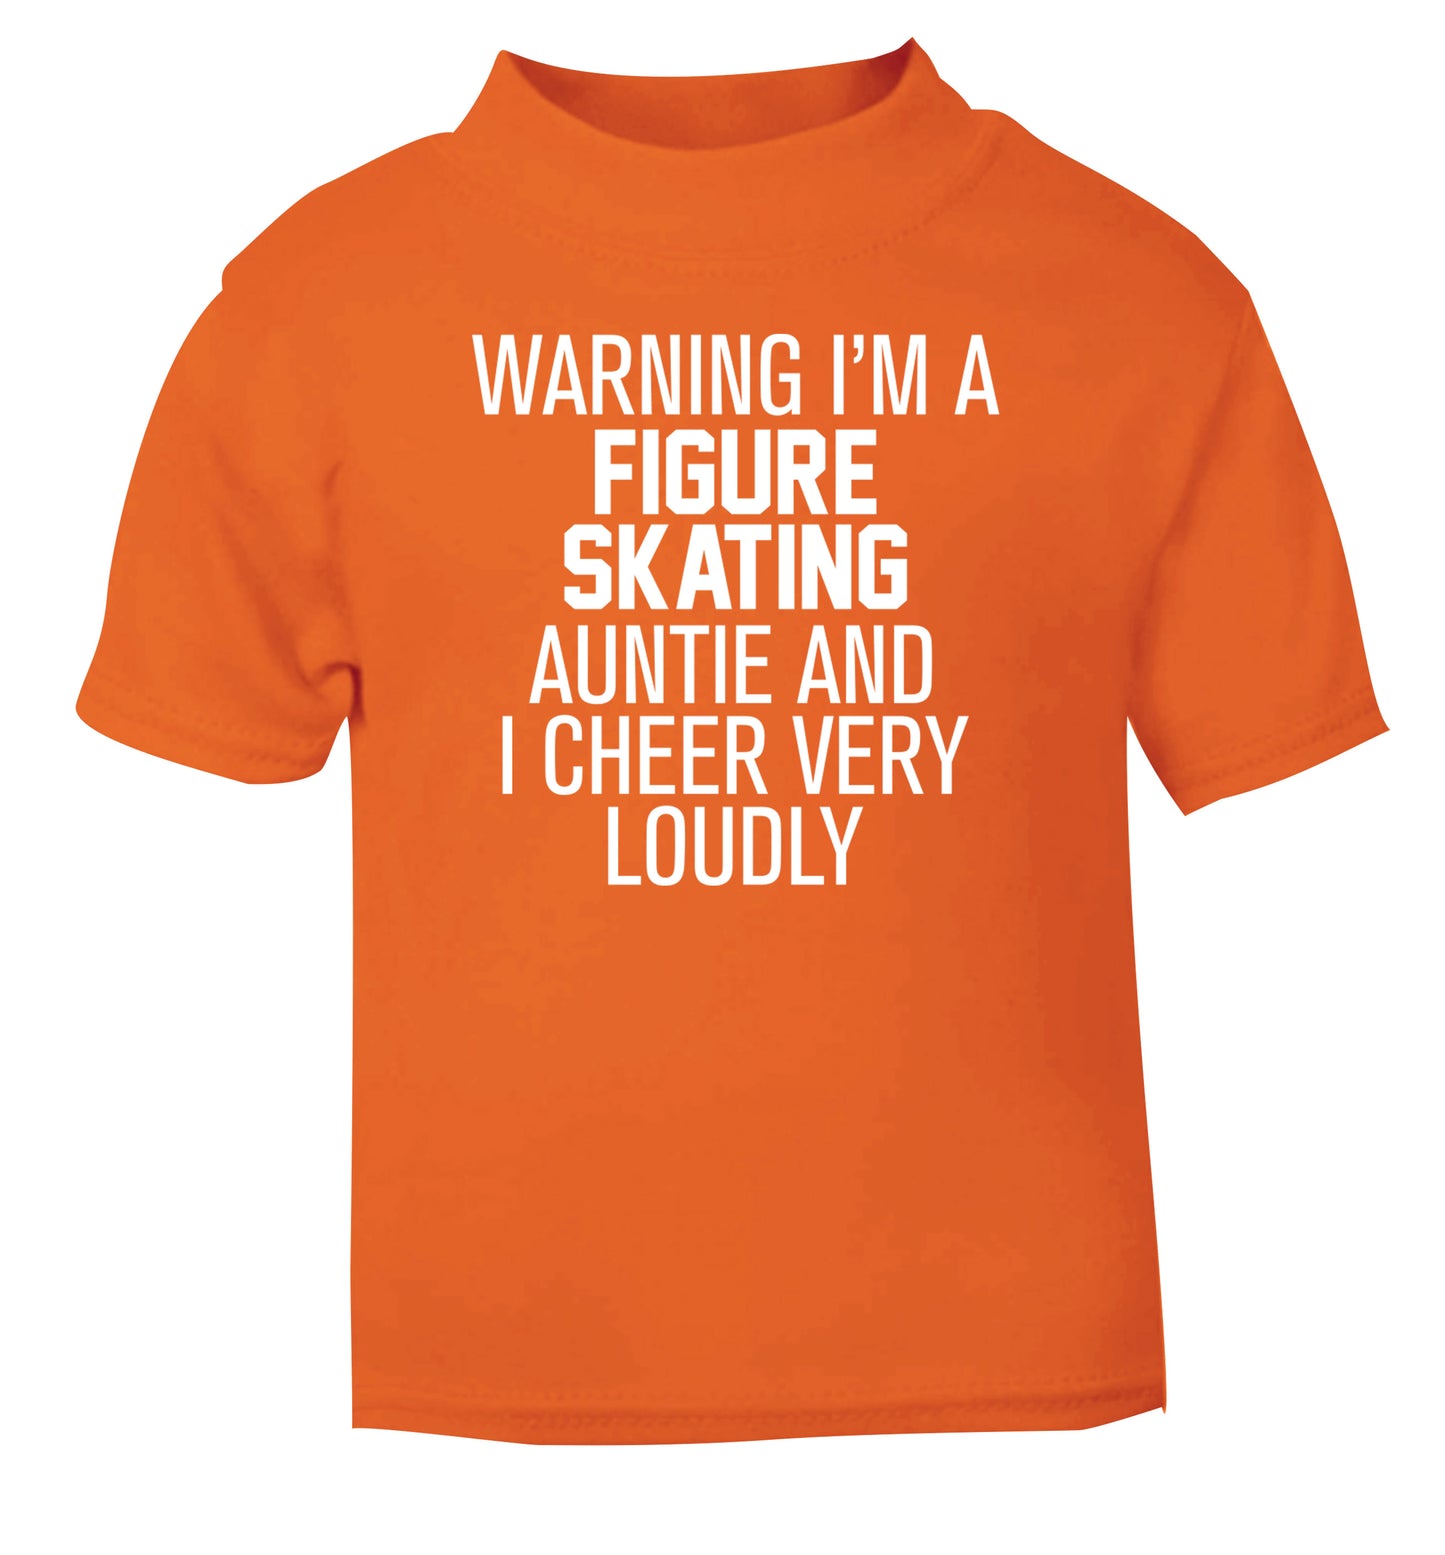 Warning I'm a figure skating auntie and I cheer very loudly orange Baby Toddler Tshirt 2 Years